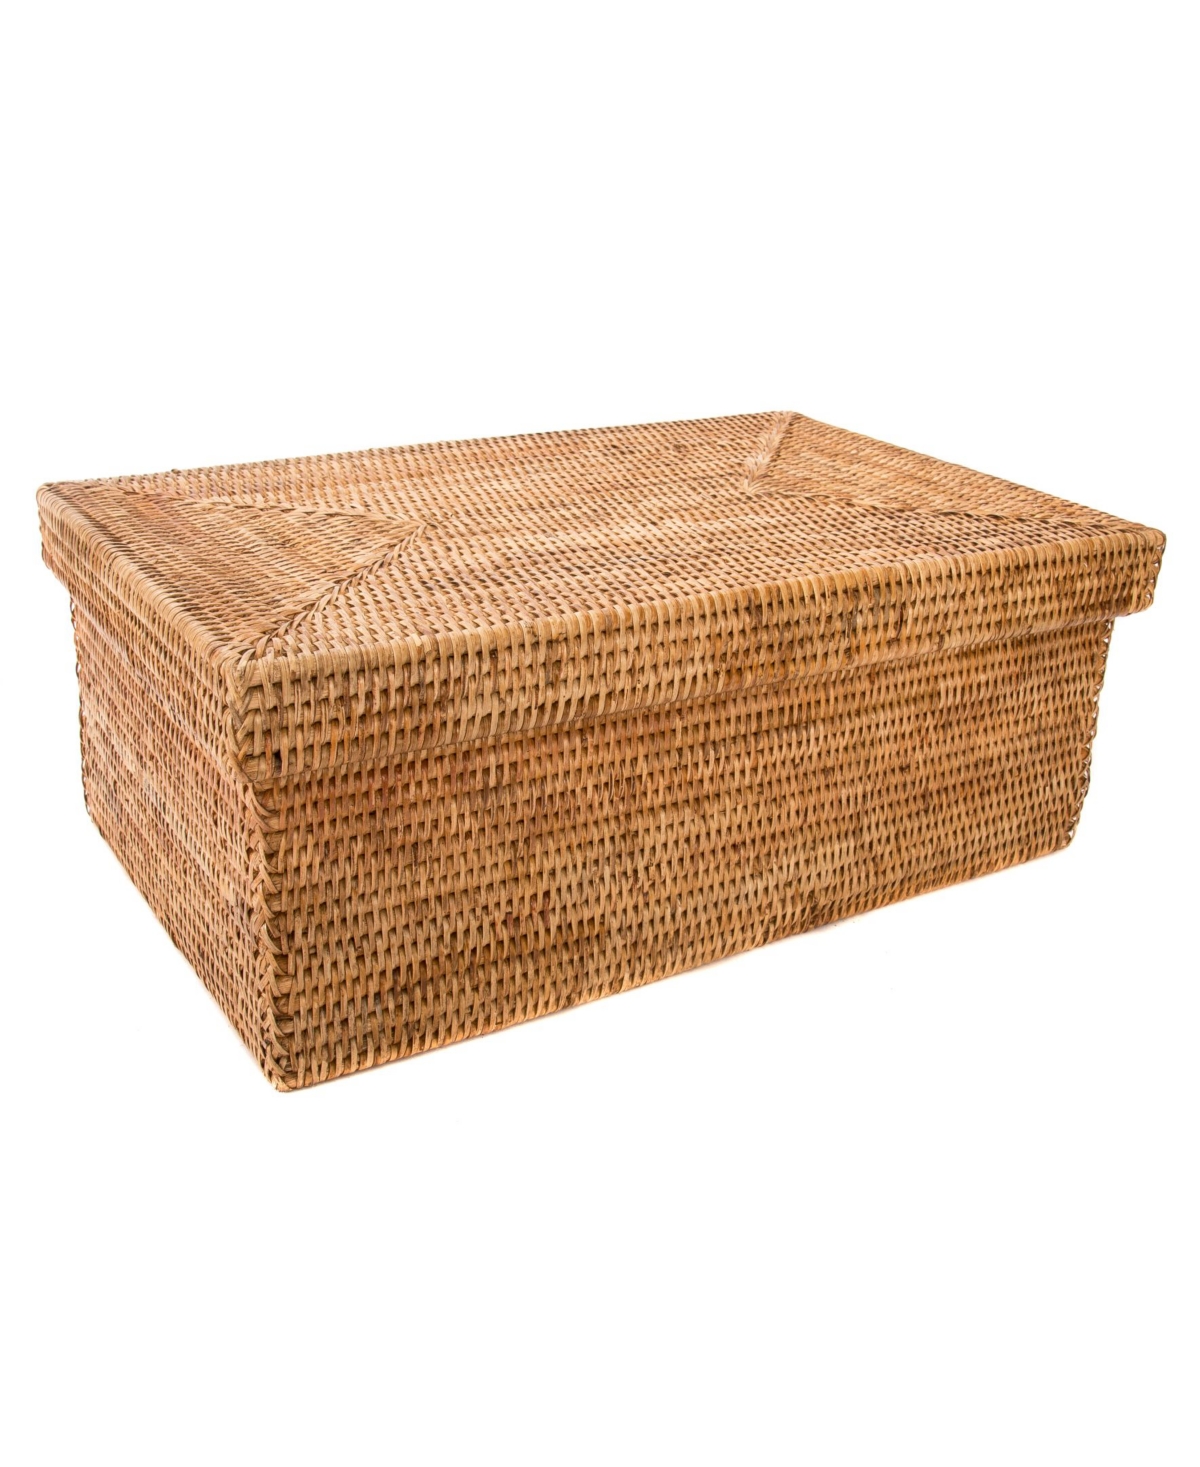 Shop Artifacts Trading Company Artifacts Rattan Rectangular Storage Box With Lid In Honey Brown